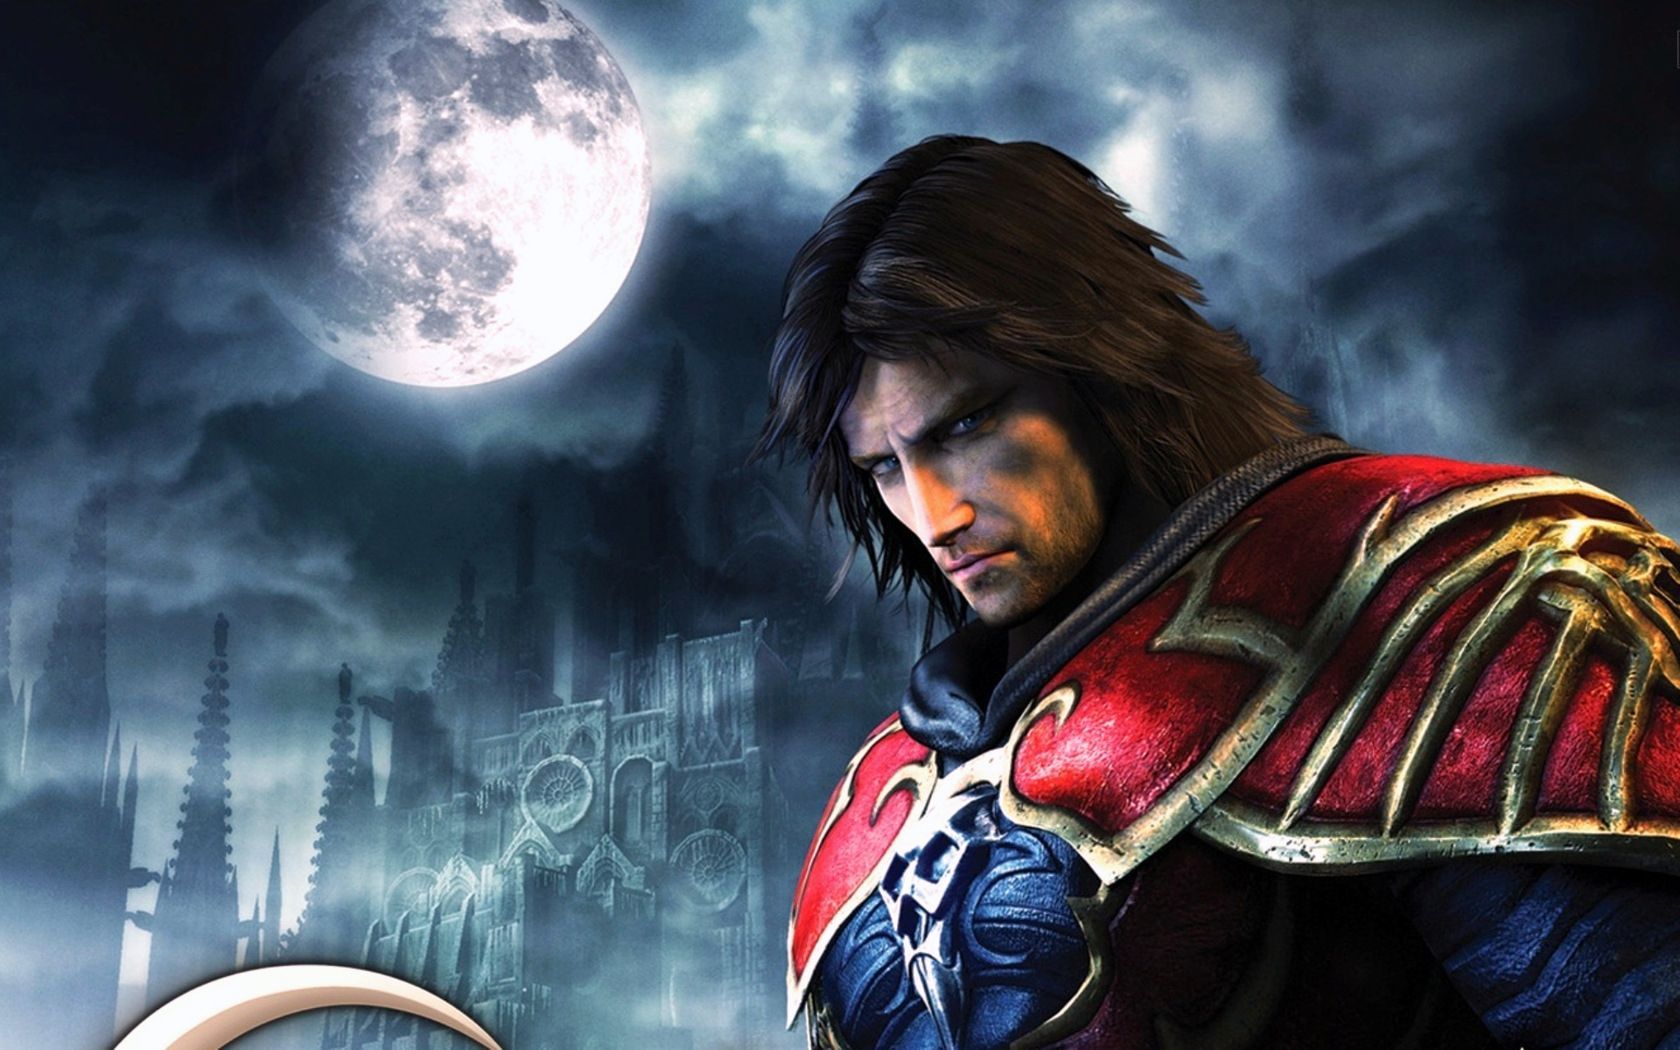 1680x1050px 230.06 KB Castlevania Lords Of Shadow